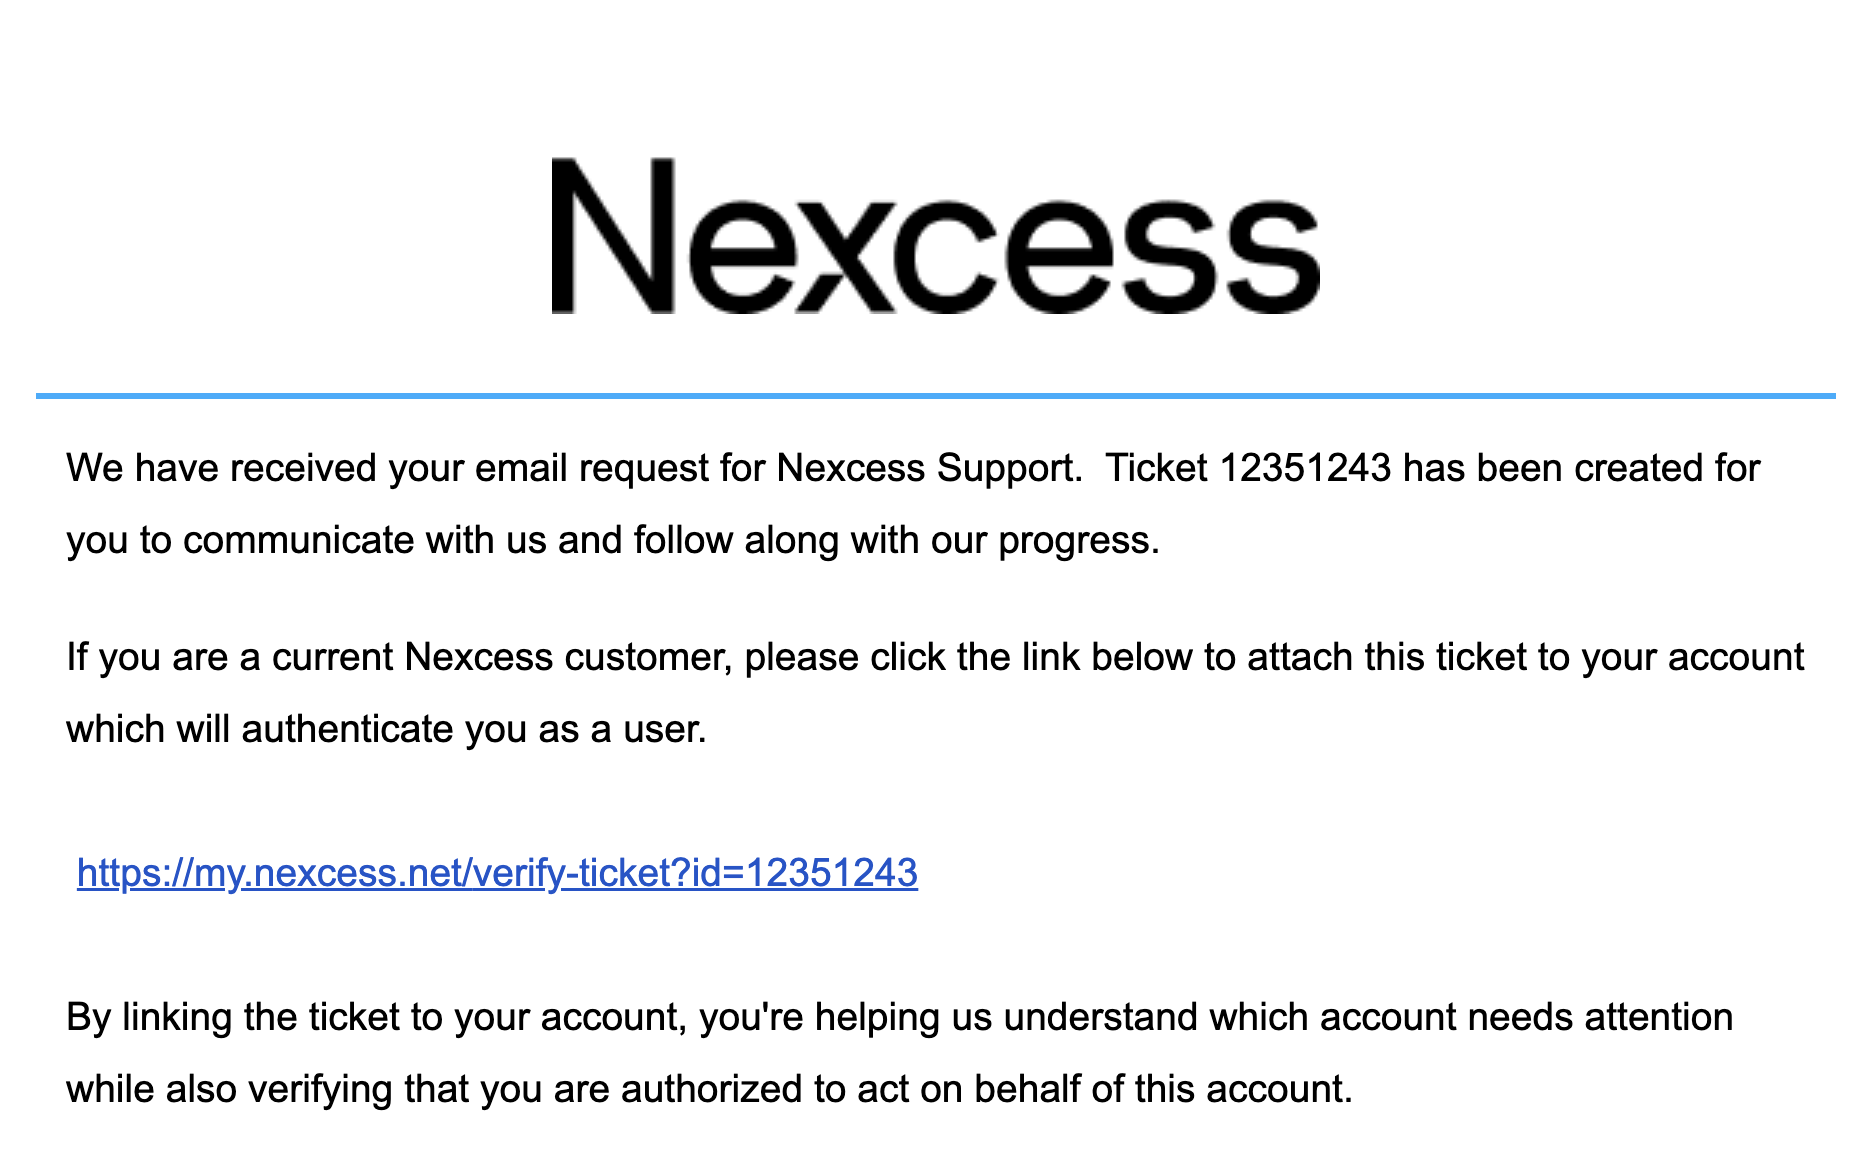 Tickets created by email will automatically get an authentication email to confirm authorization and attach the ticket to the account. When you click the link, the Nexcess Client Portal will prompt you to log in so you can confirm the ticket.